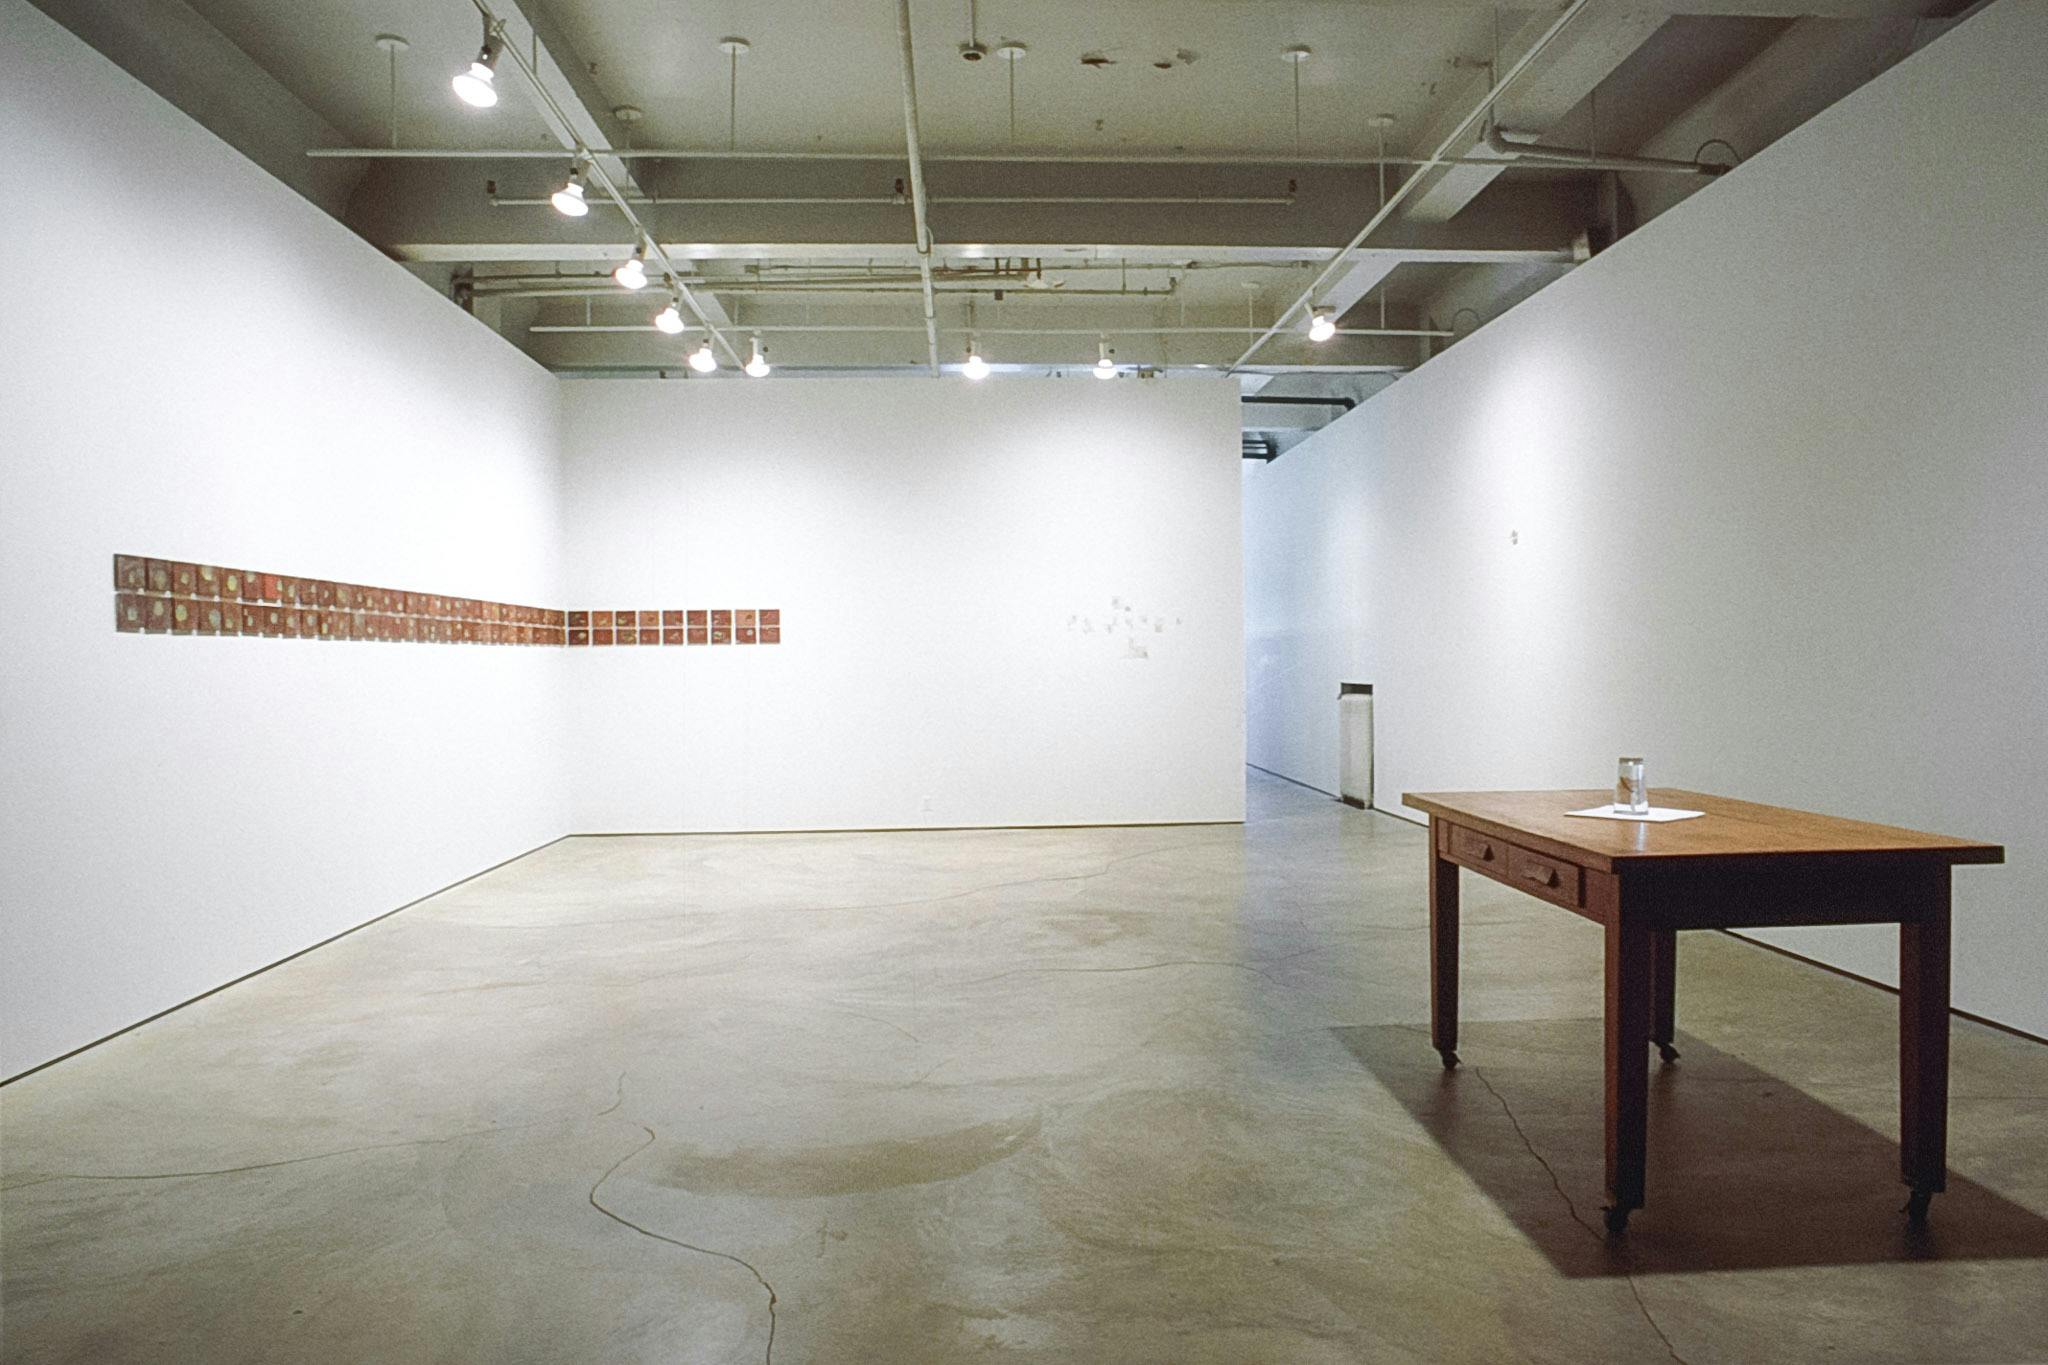 This image shows two artworks installed in the gallery. On the floor, a desk with a clear glass cup is placed. A collection of small tiles are mounted on the back wall. 